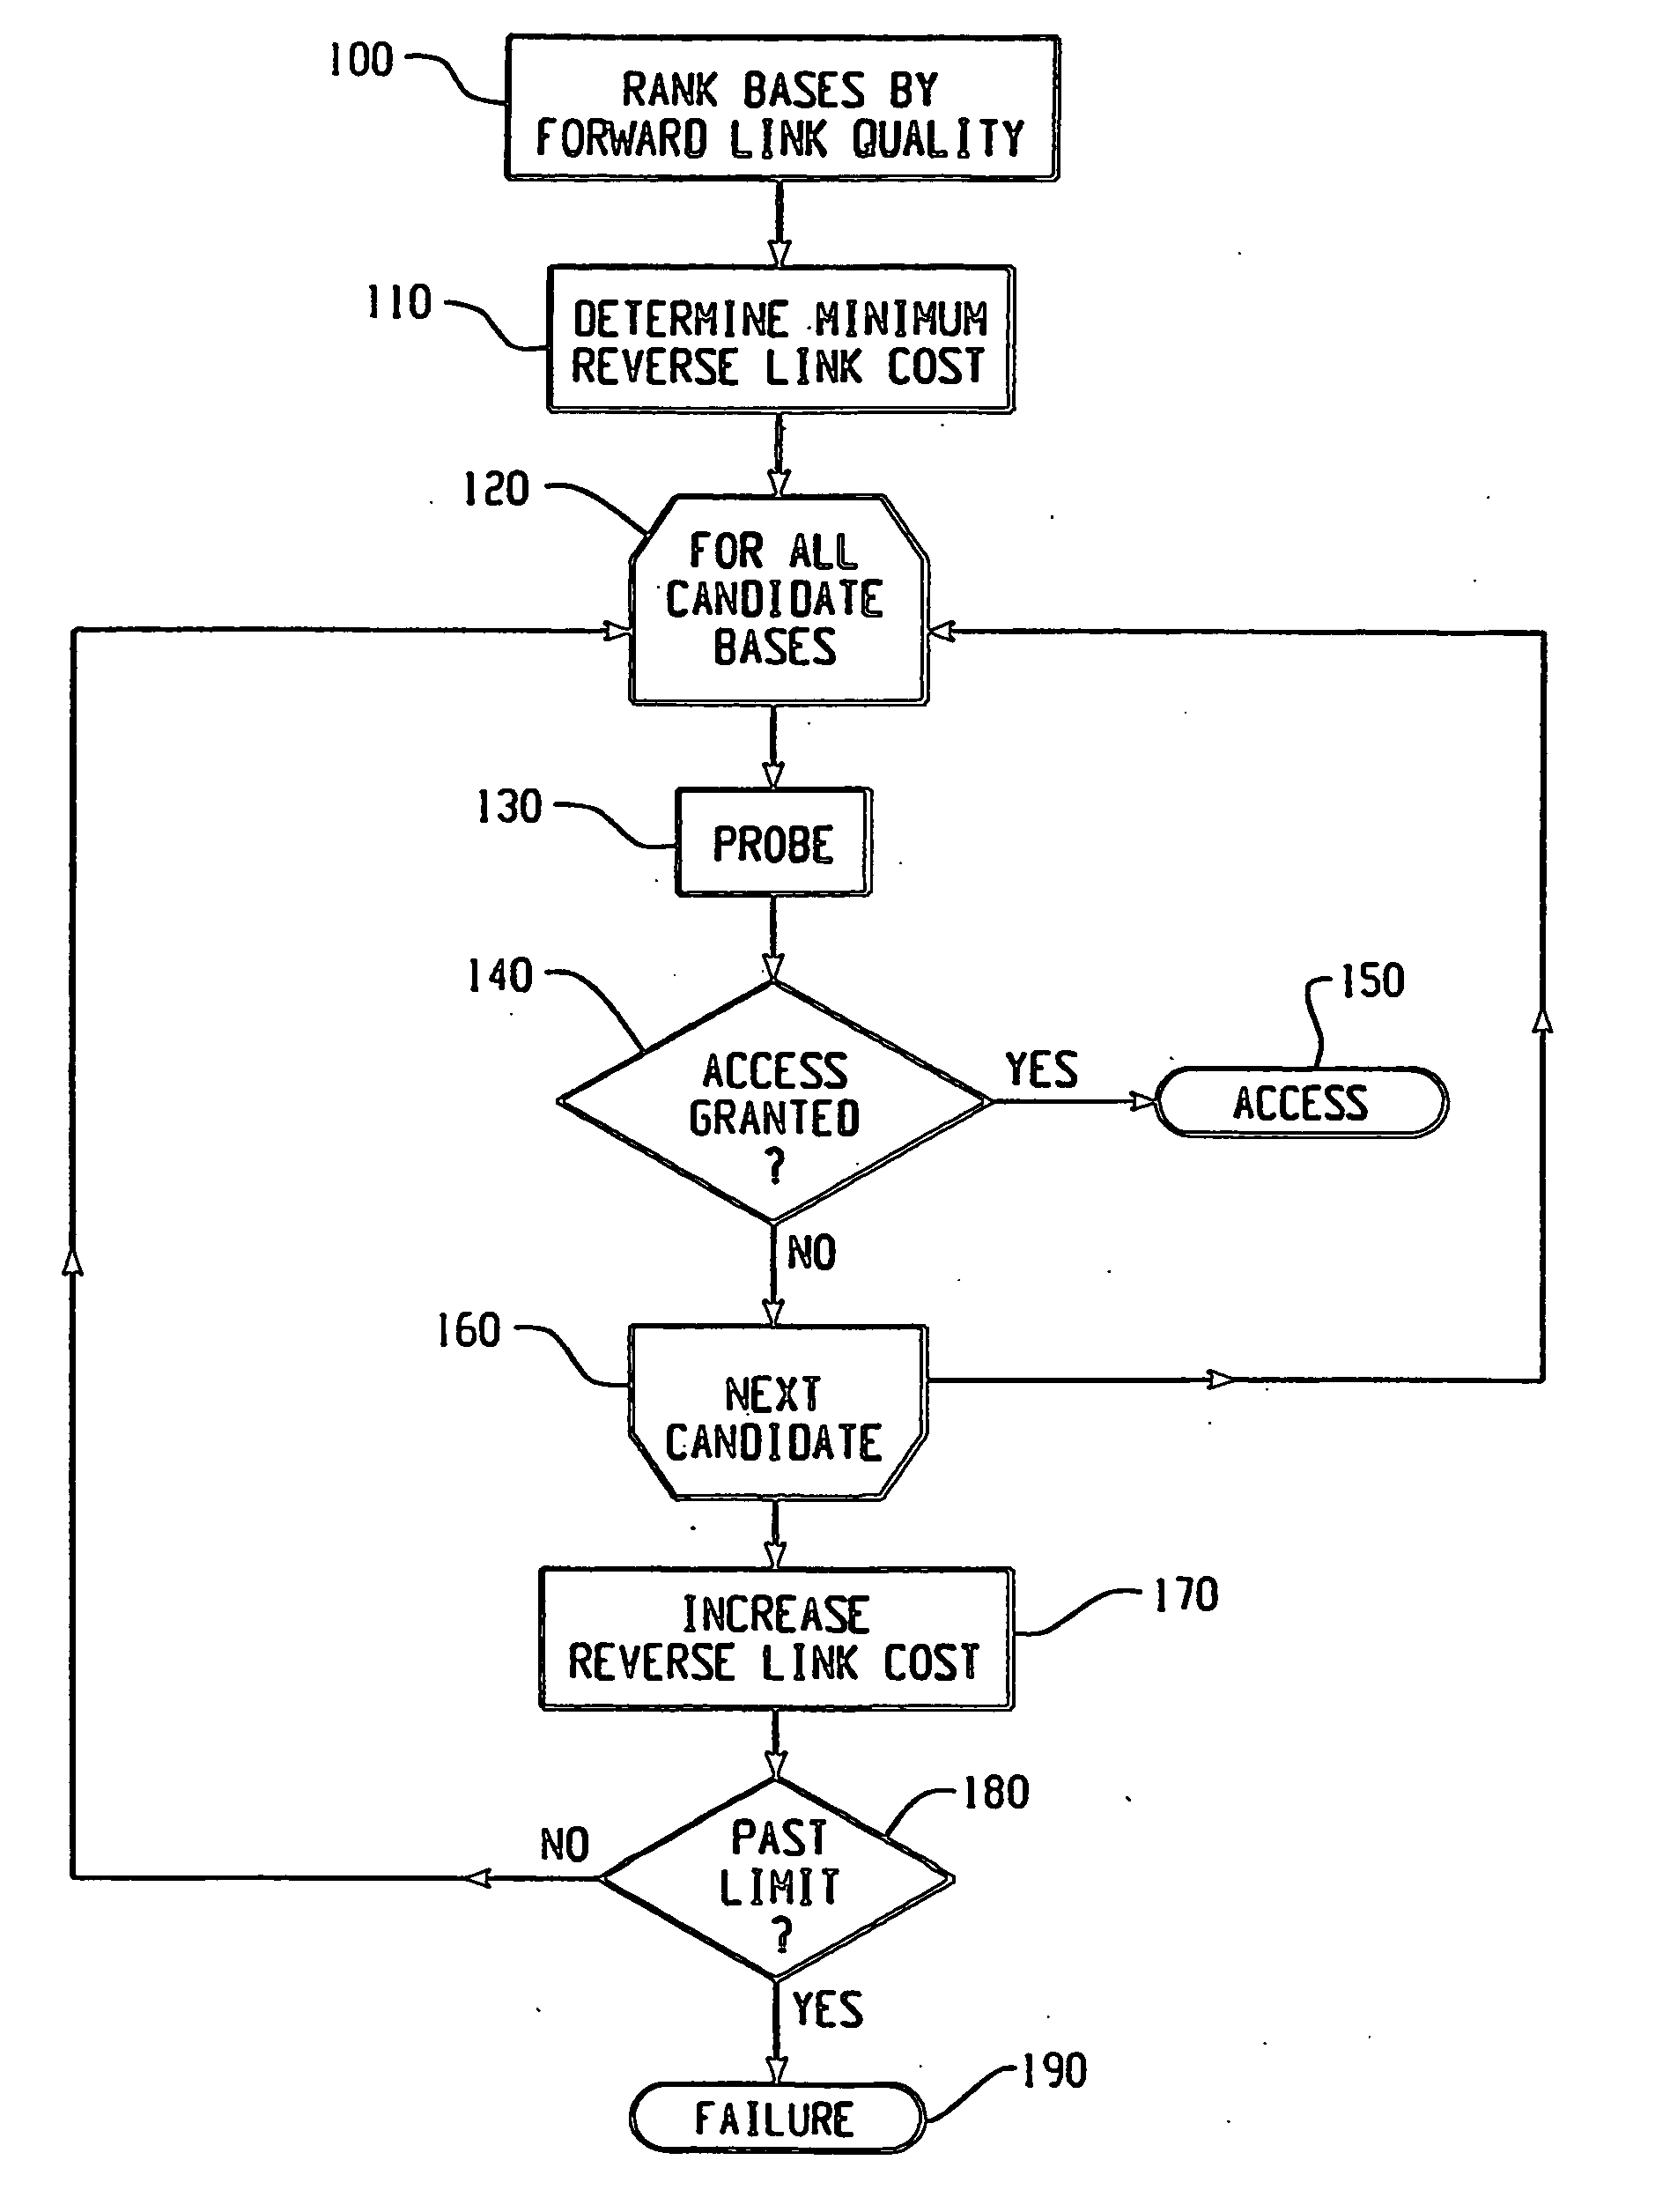 Method of system access to a wireless network